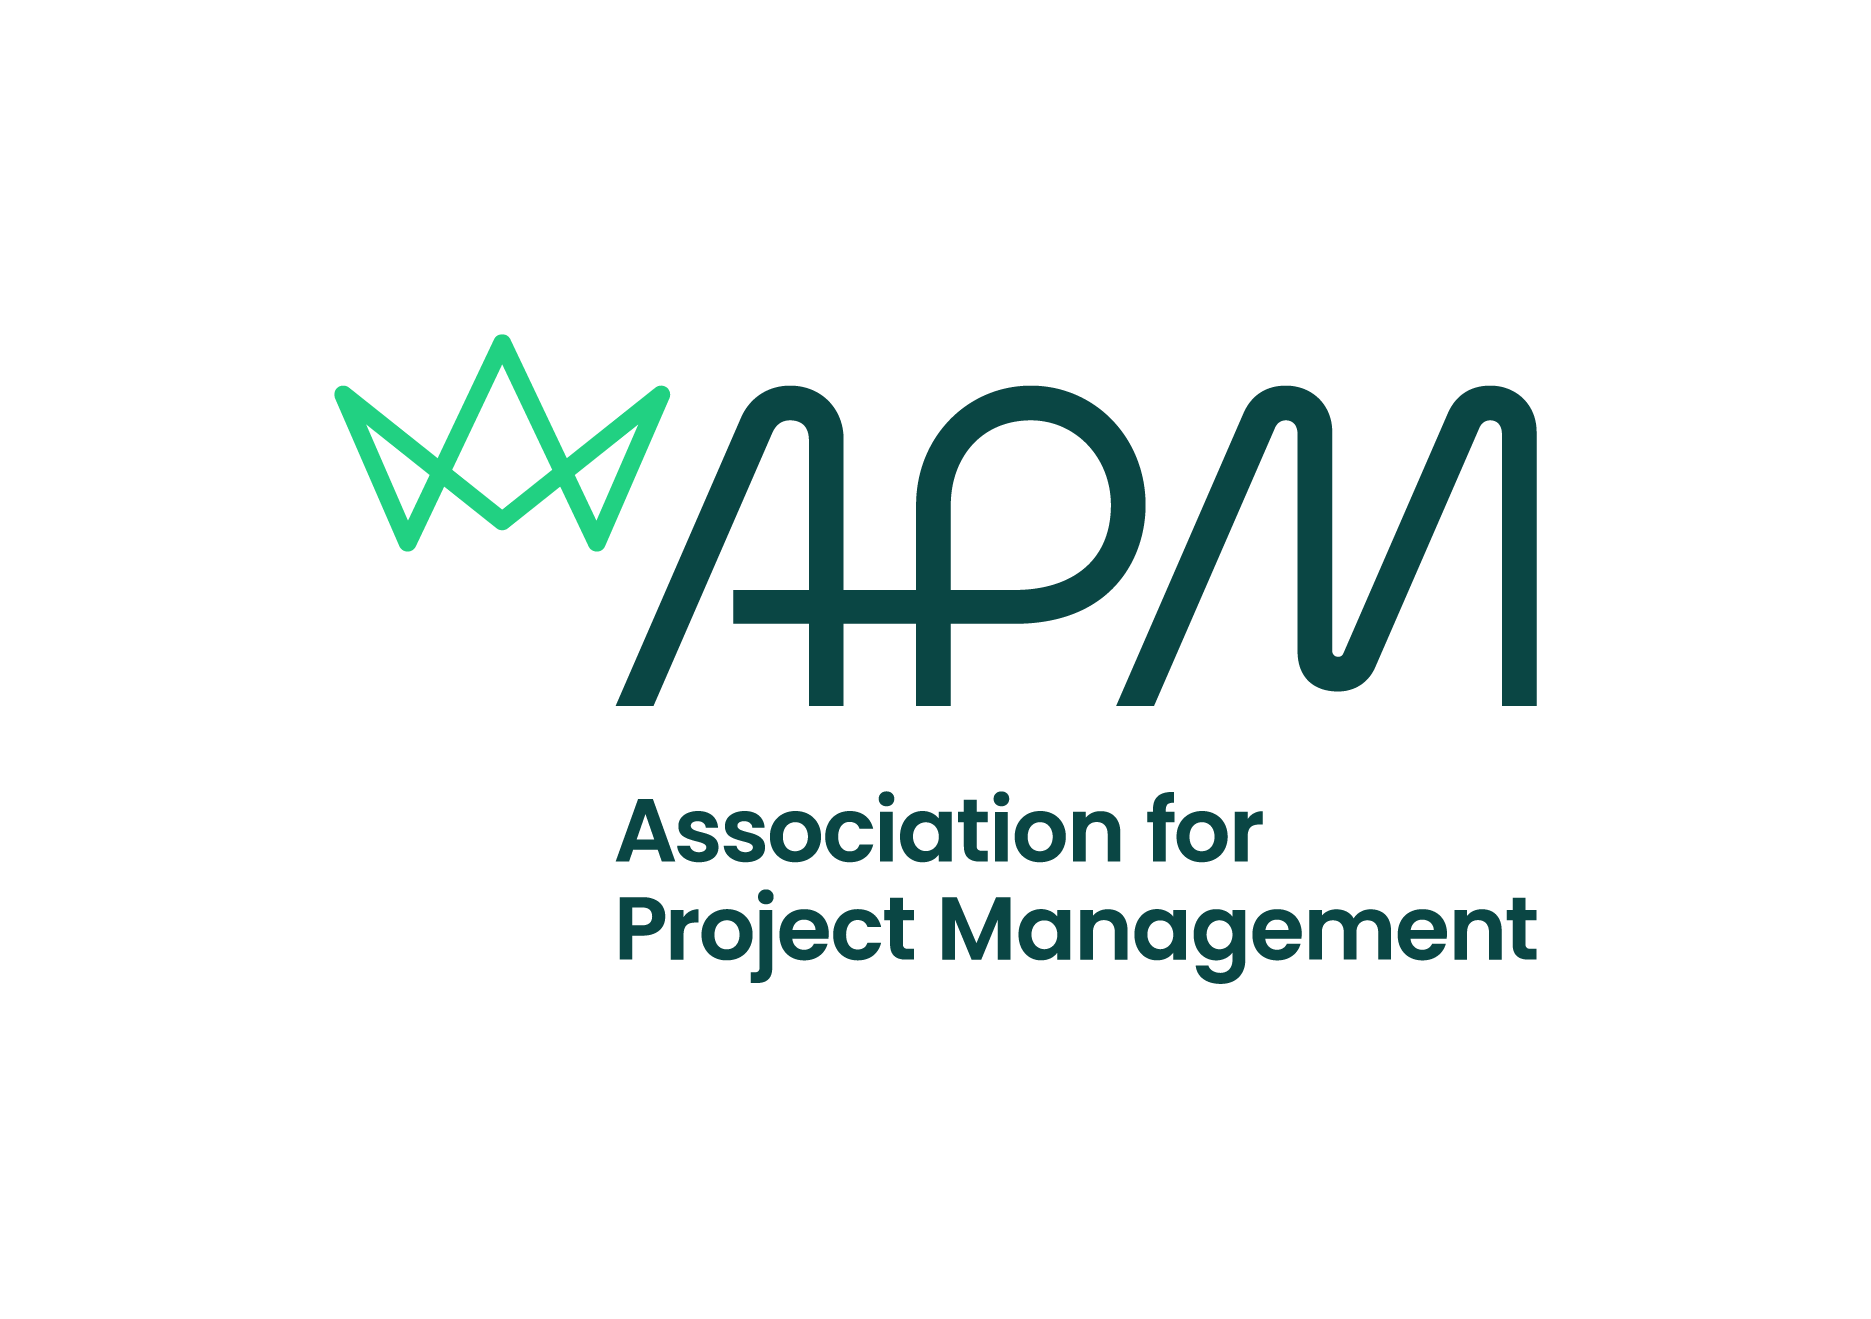 Association for Project Management reveals new brand